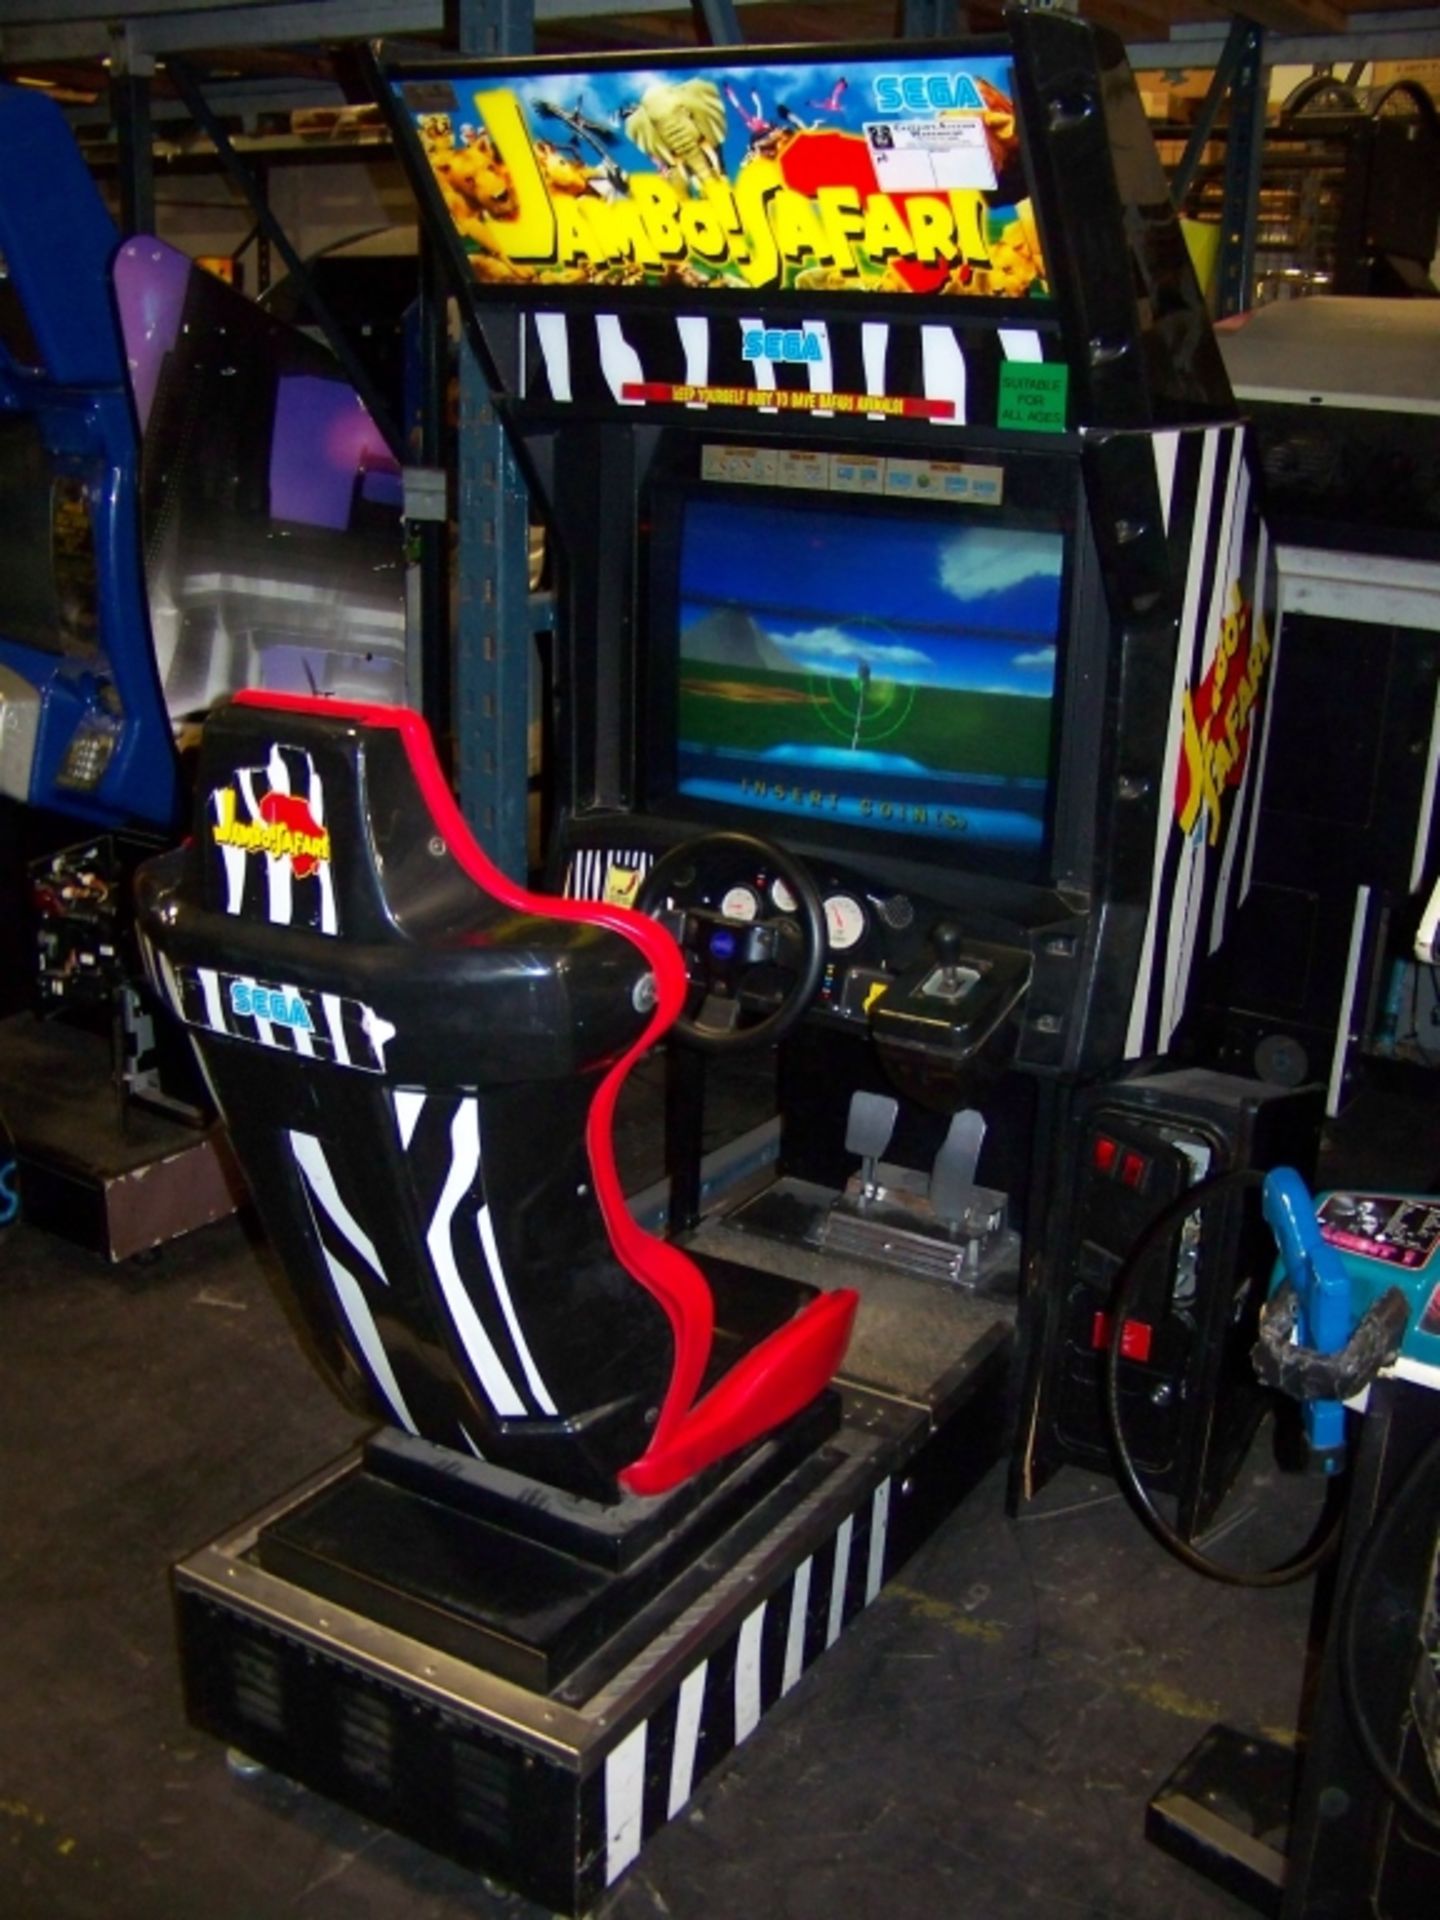 JAMBO SAFARI SITDOWN DRIVER ARCADE GAME SEGA NAOMI Item is in used condition. Evidence of wear and